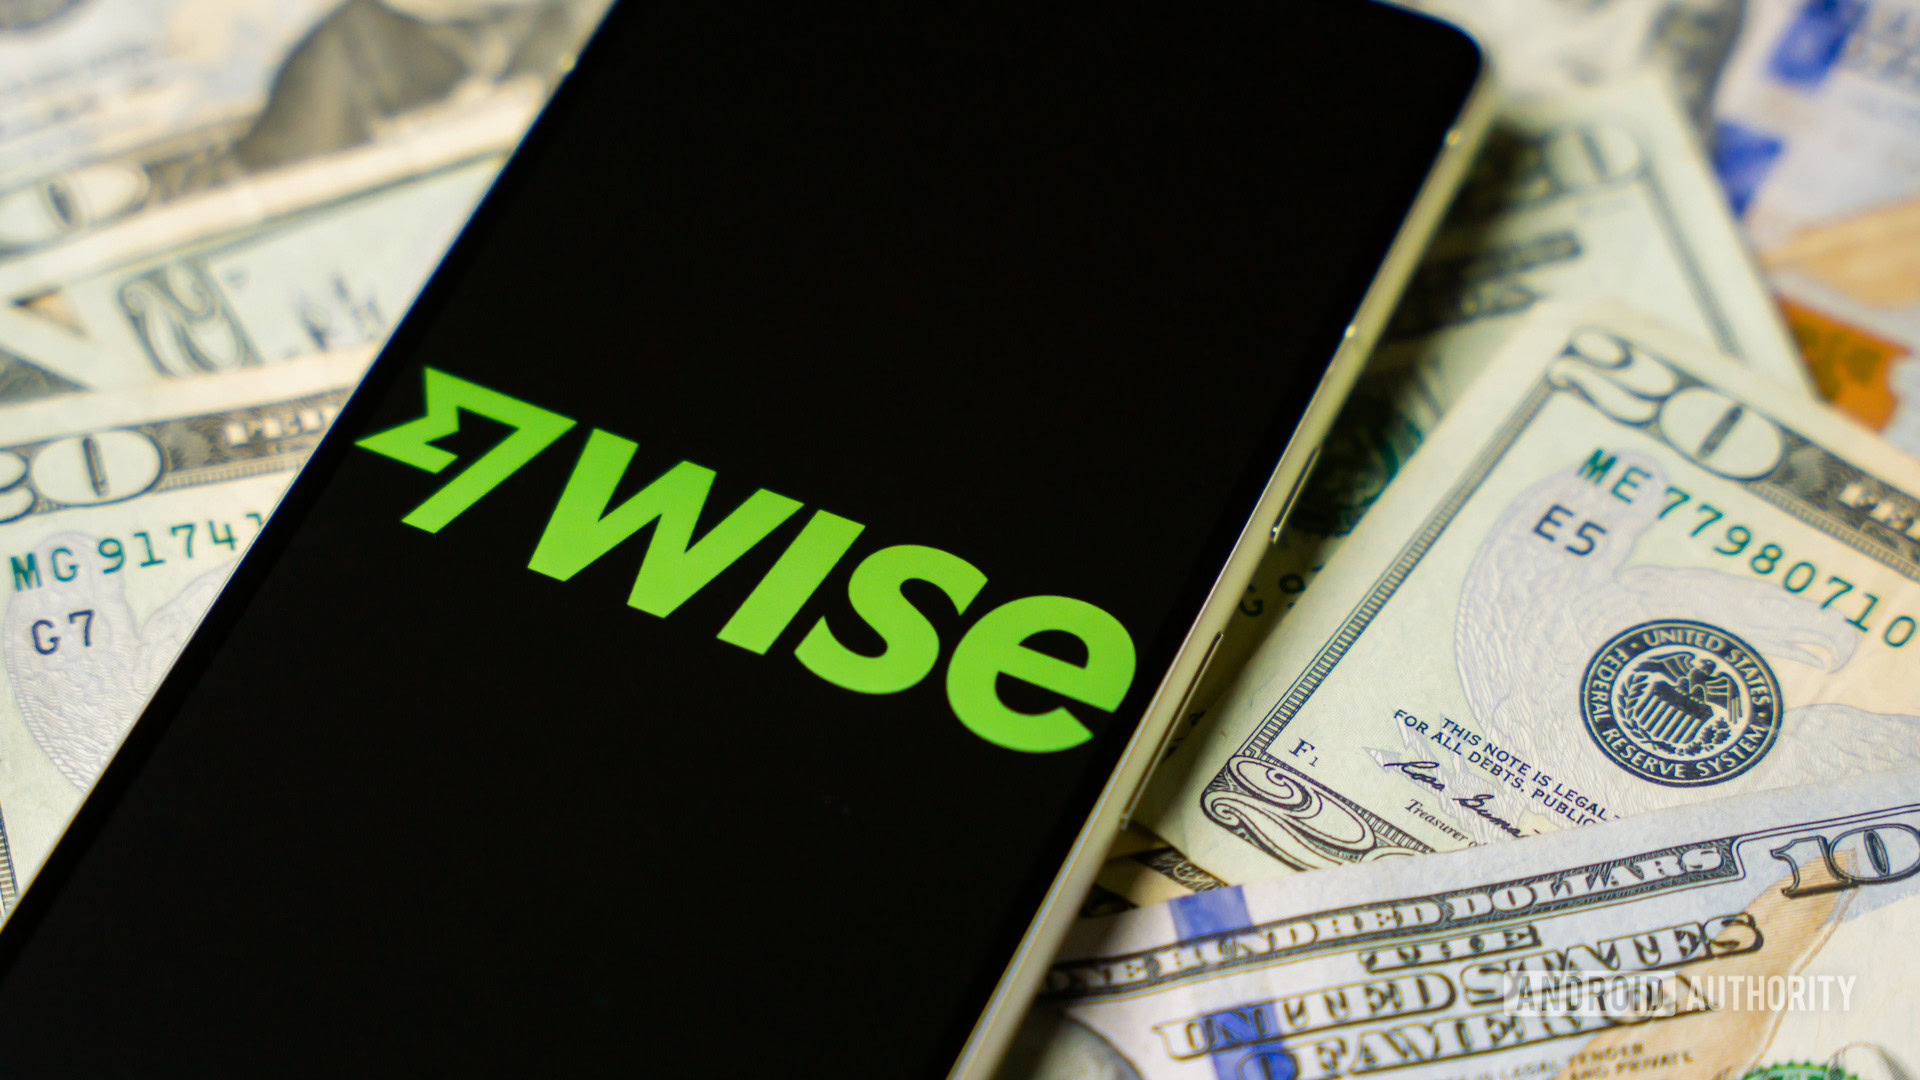 Wise logo on smartphone with cash on background stock photo (4)